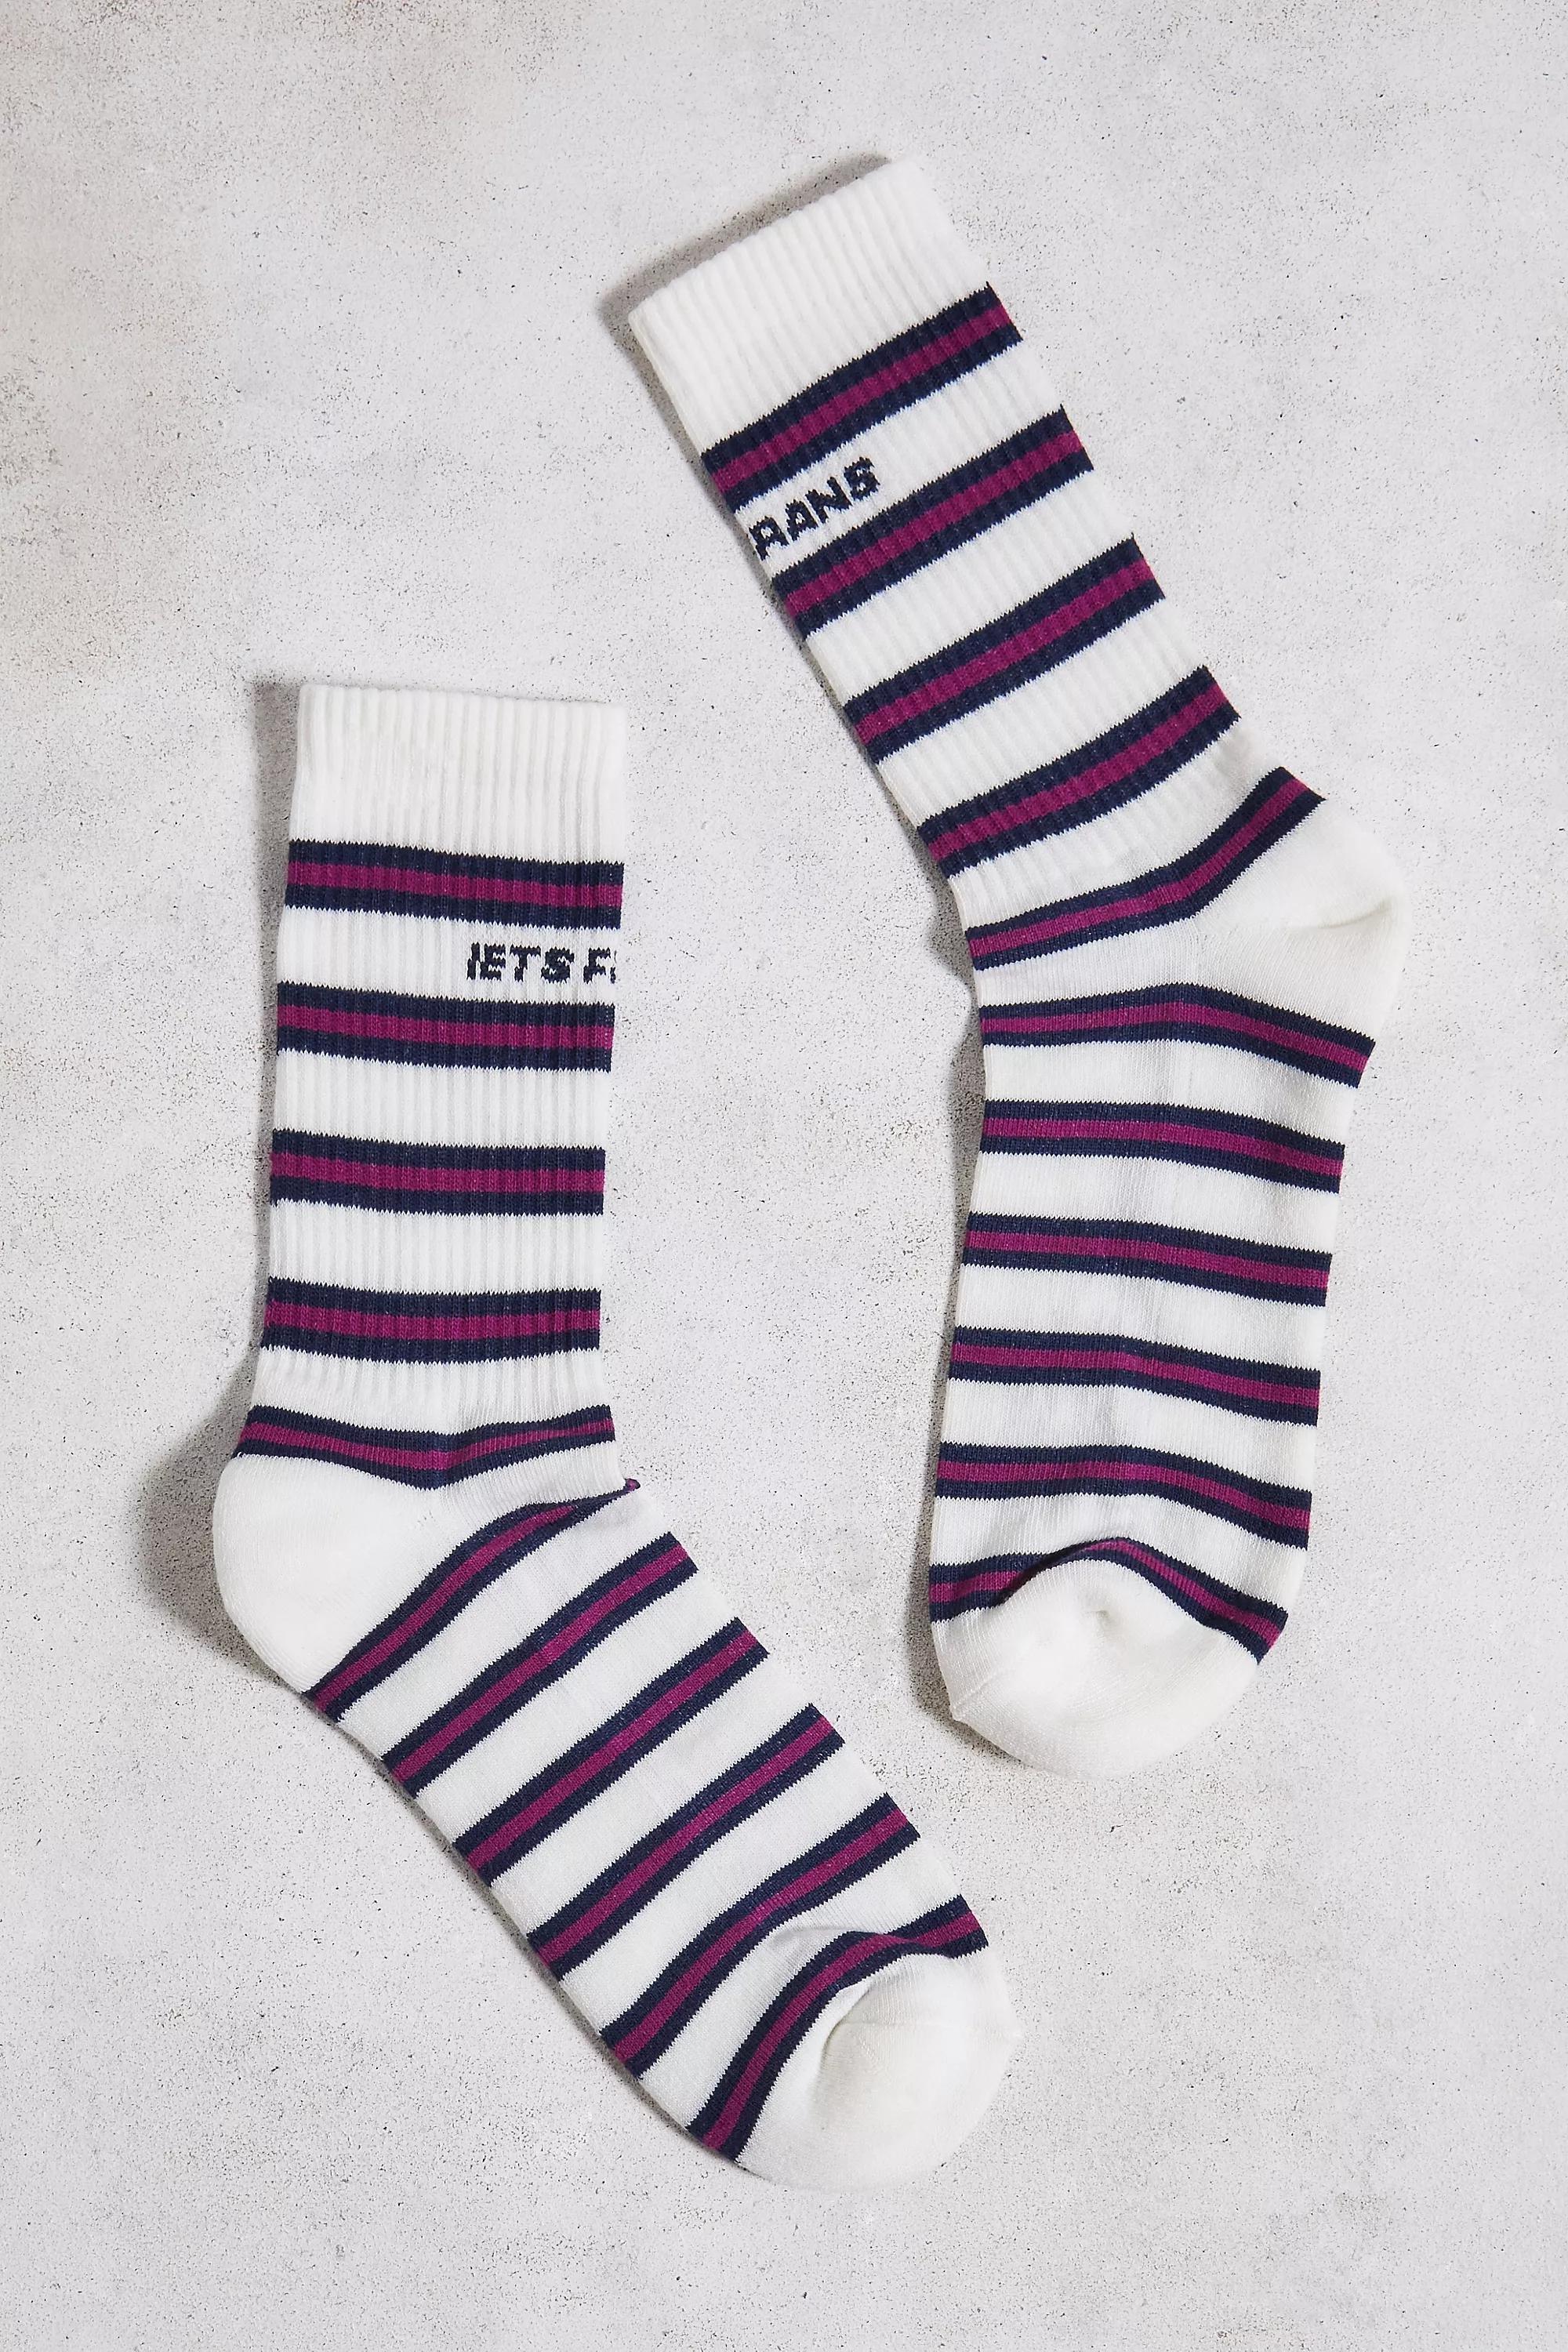 Urban Outfitters - Navy Iets Frans Magenta Stripe Socks